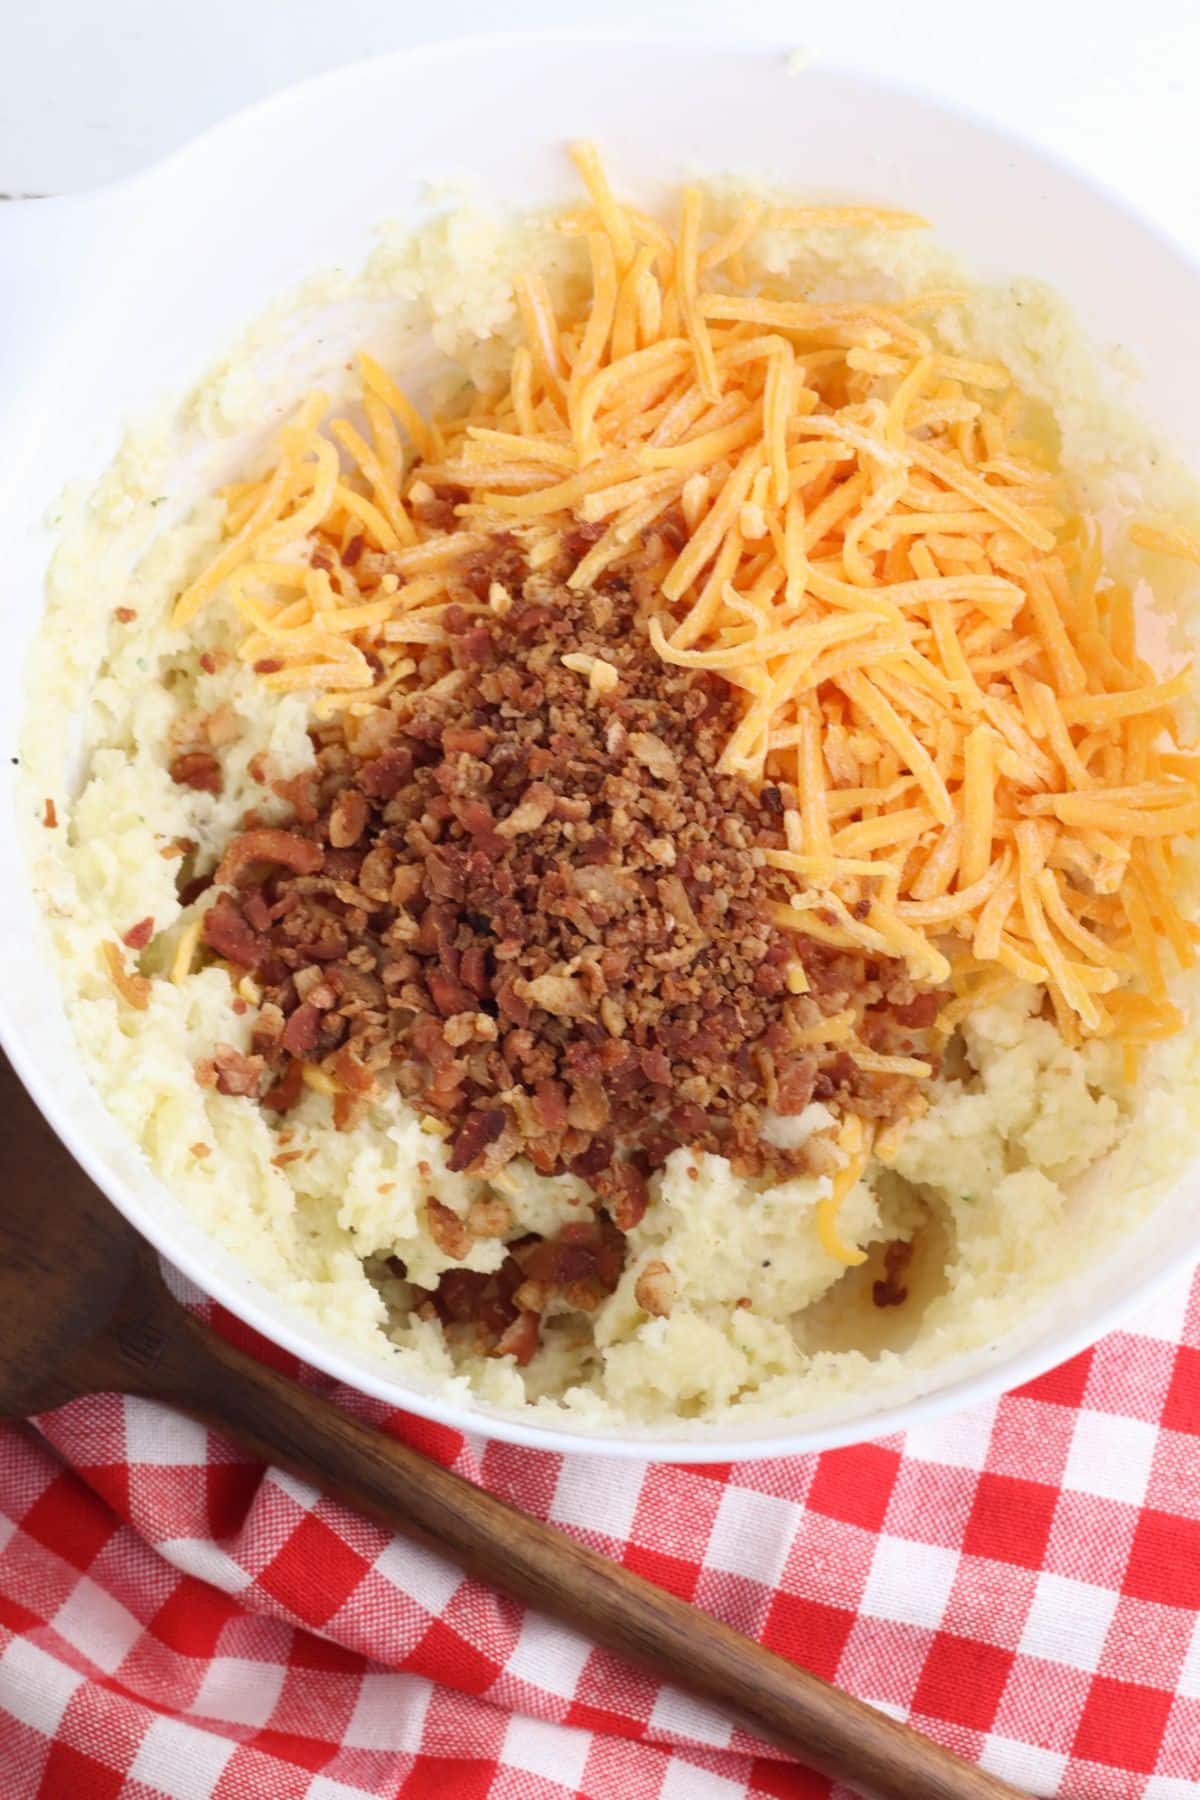 Potato mixture, shredded cheese and bacon in a mixing bowl.